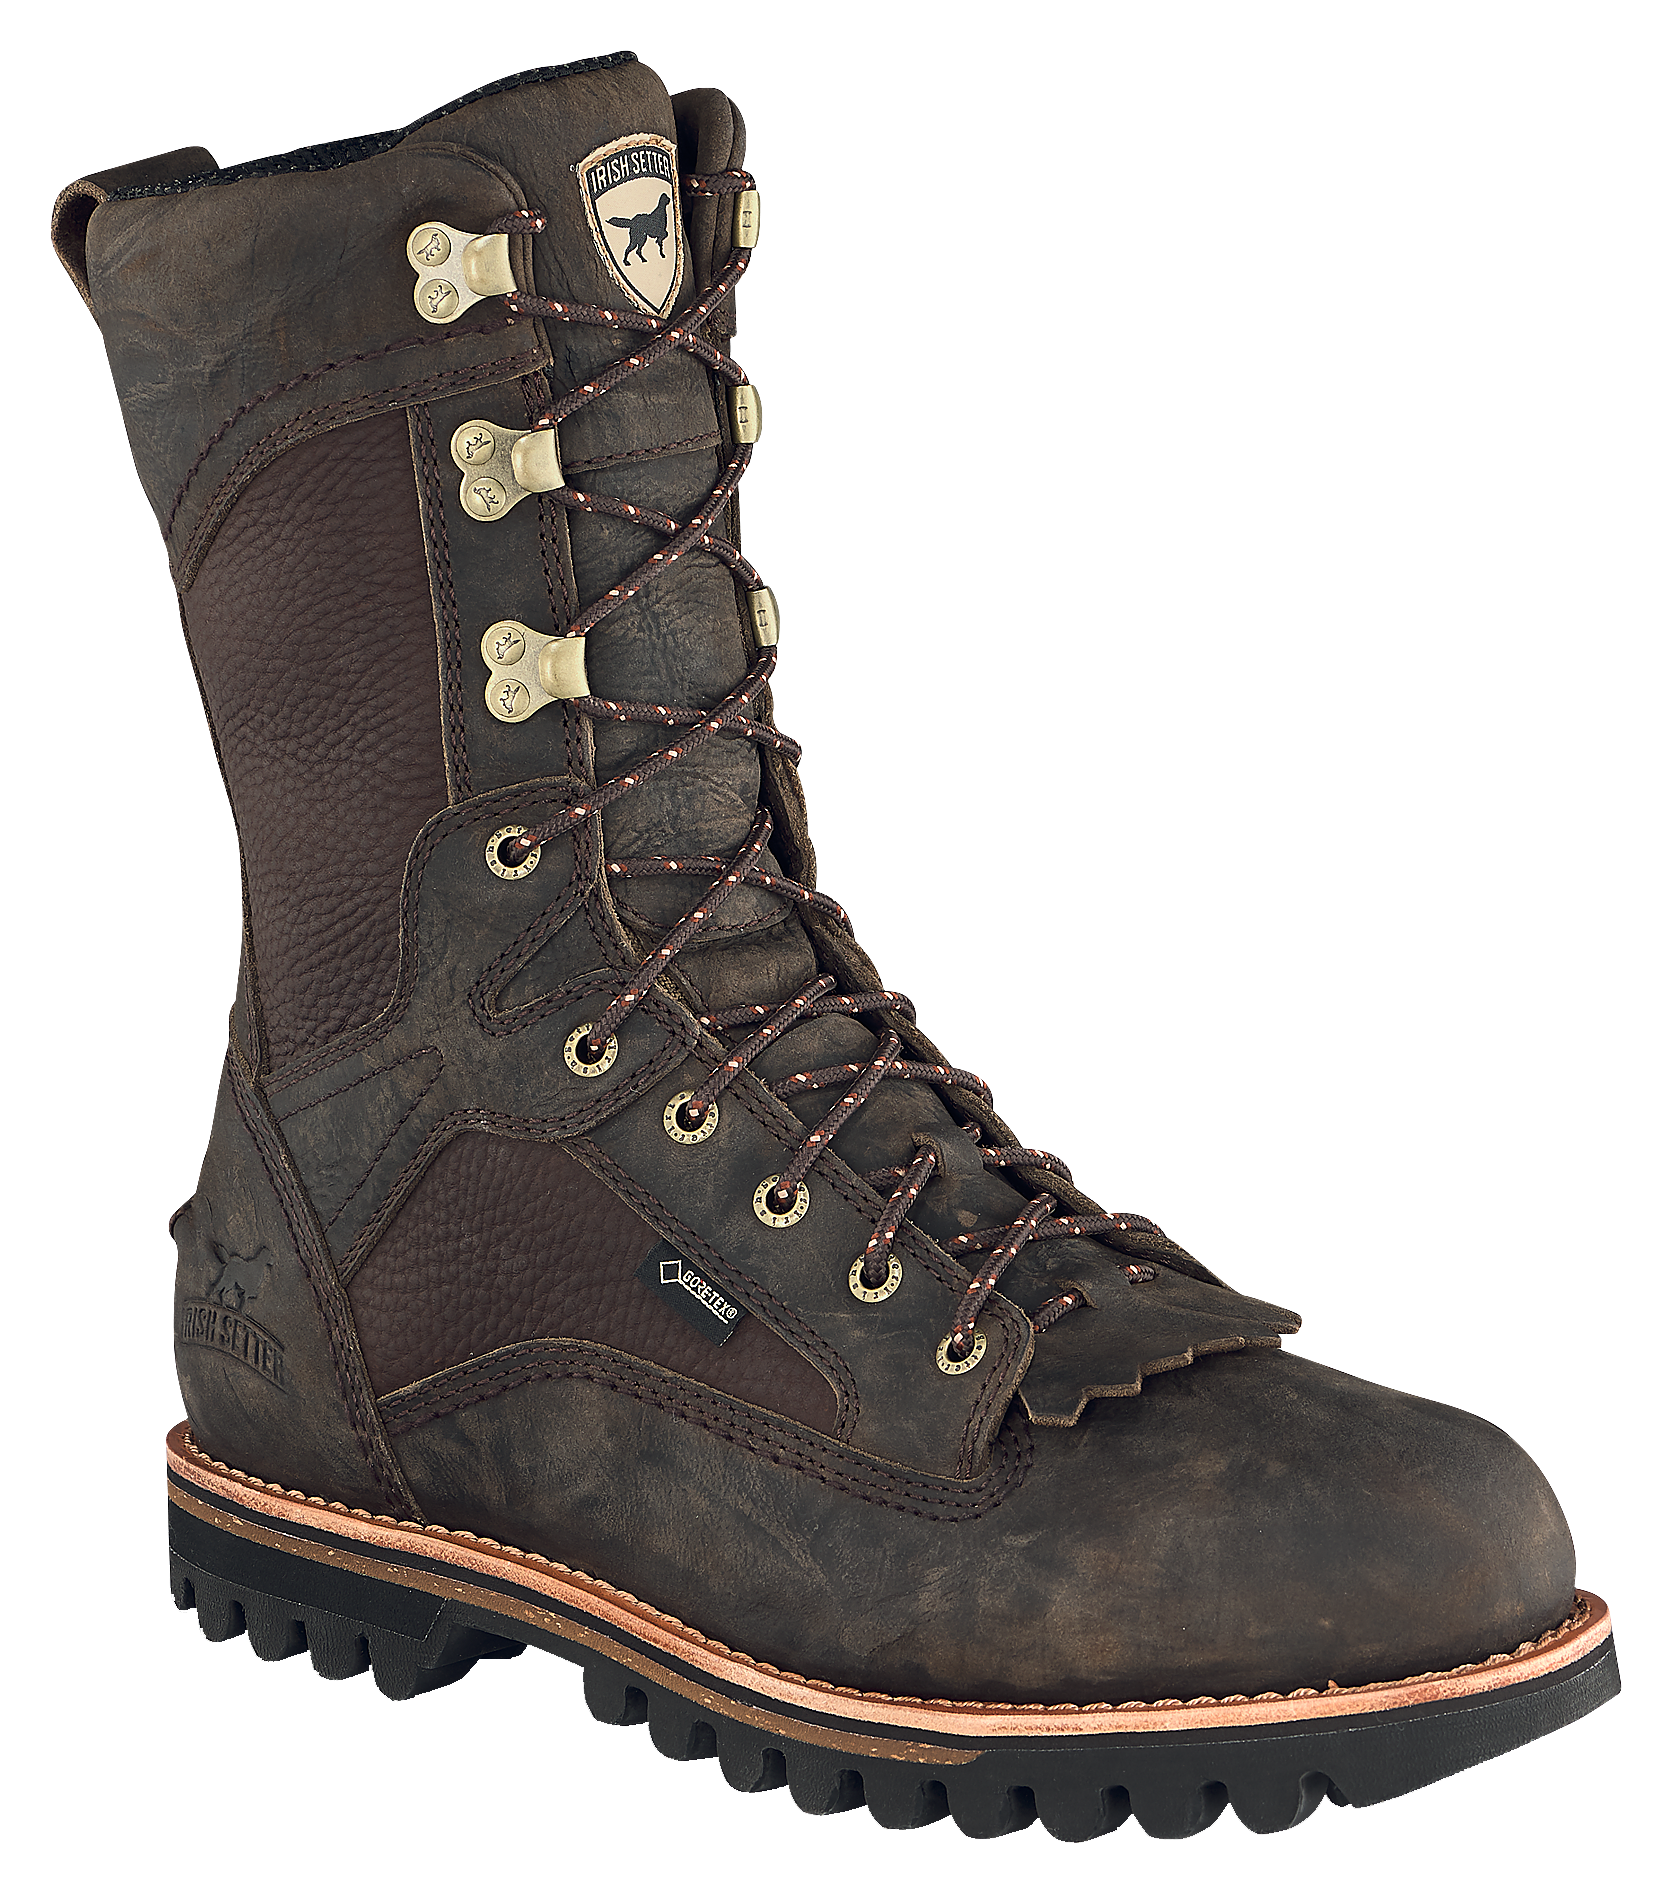 Irish Setter Elk Tracker GORE-TEX Insulated Hunting Boots for Men - Brown - 14M